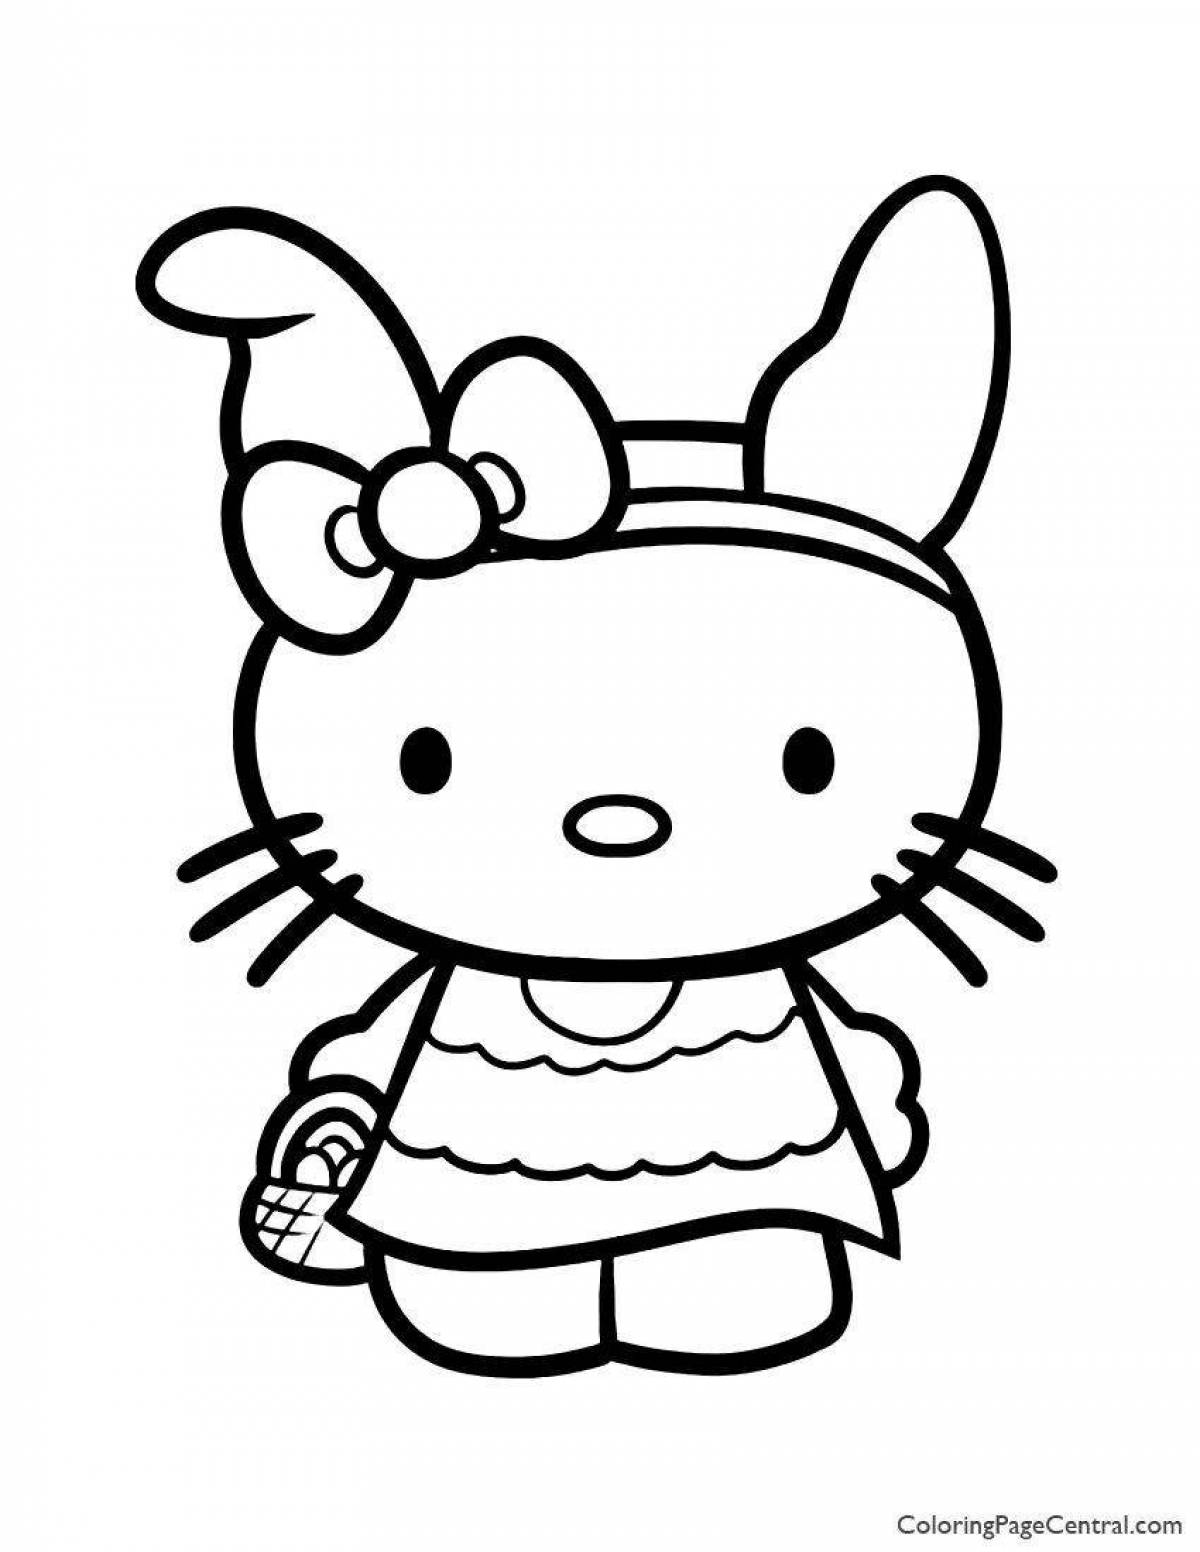 Fancy coloring hello kitty with clothes